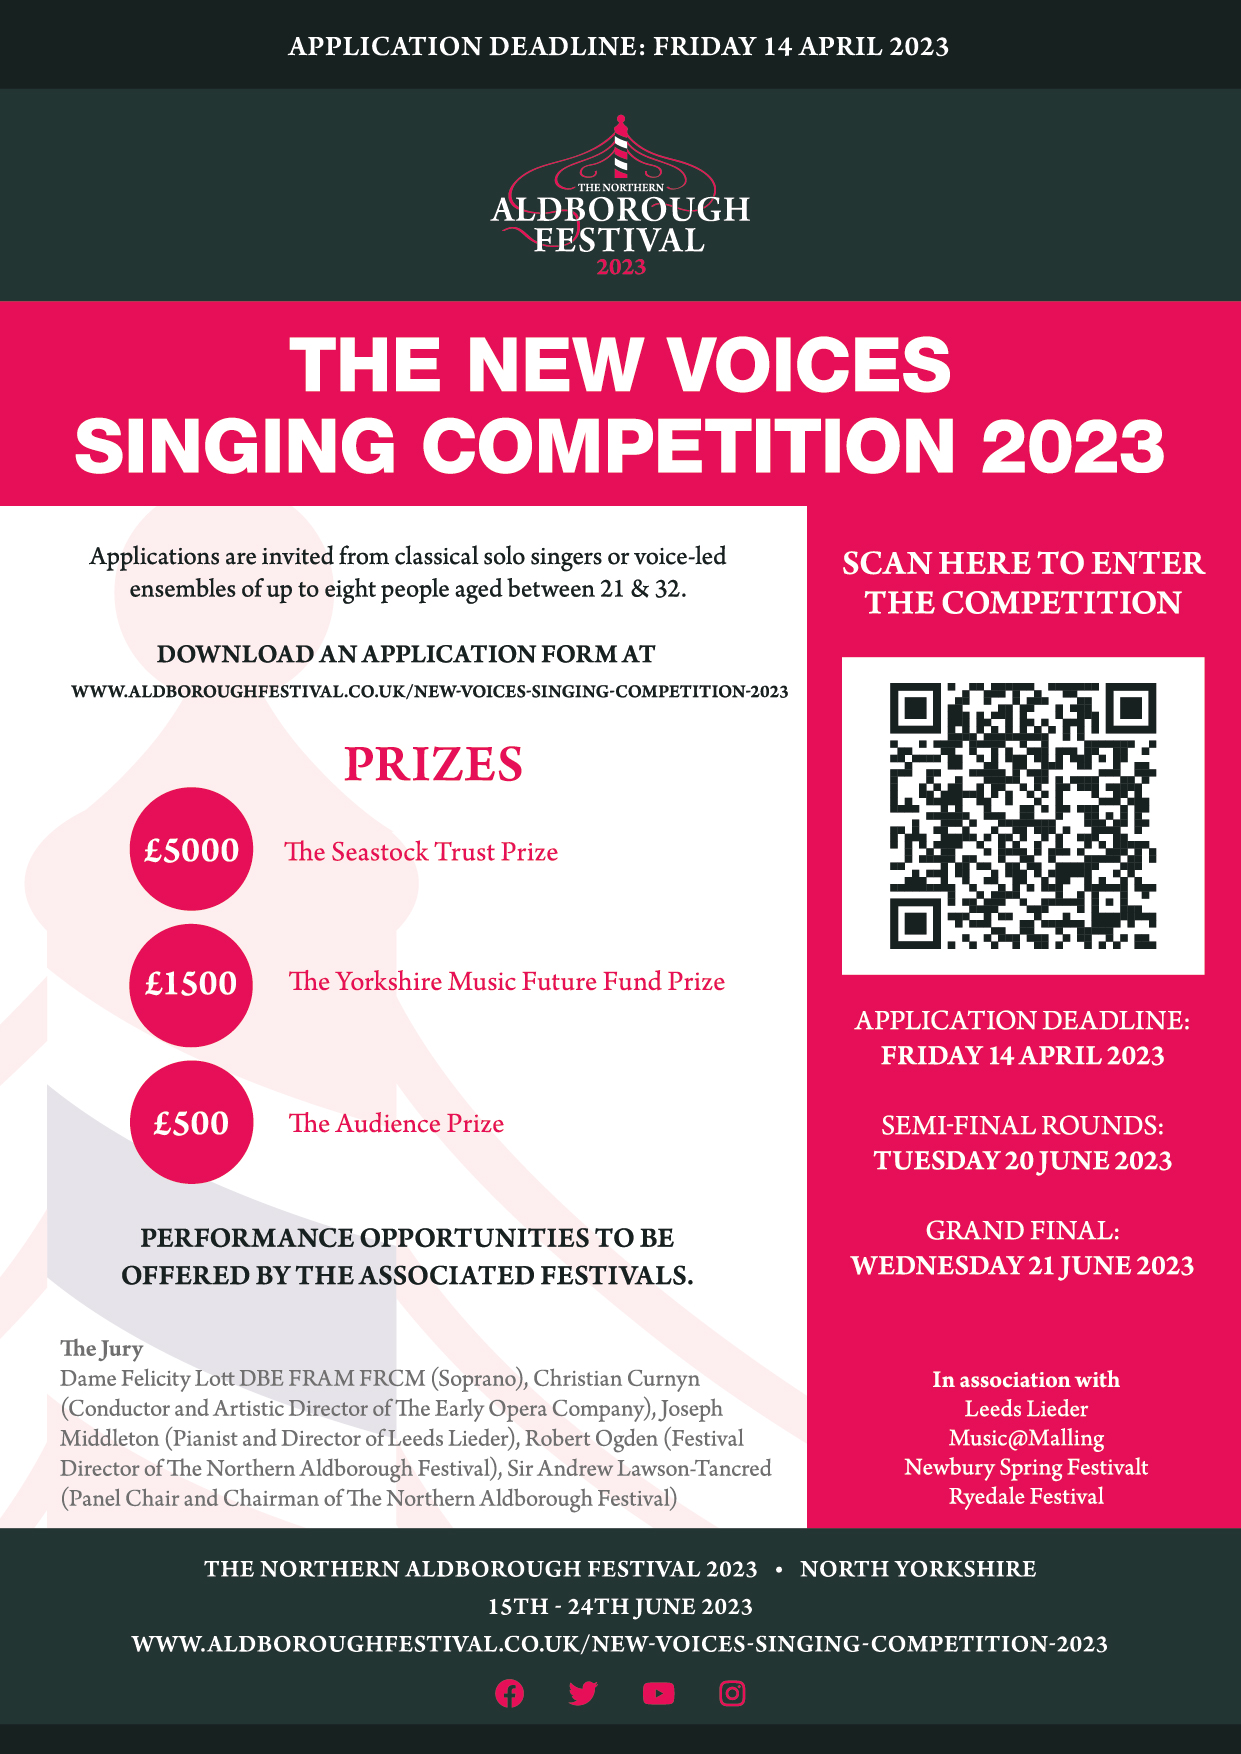 New Voices Singing Competition 2023 The Northern Aldborough Festival